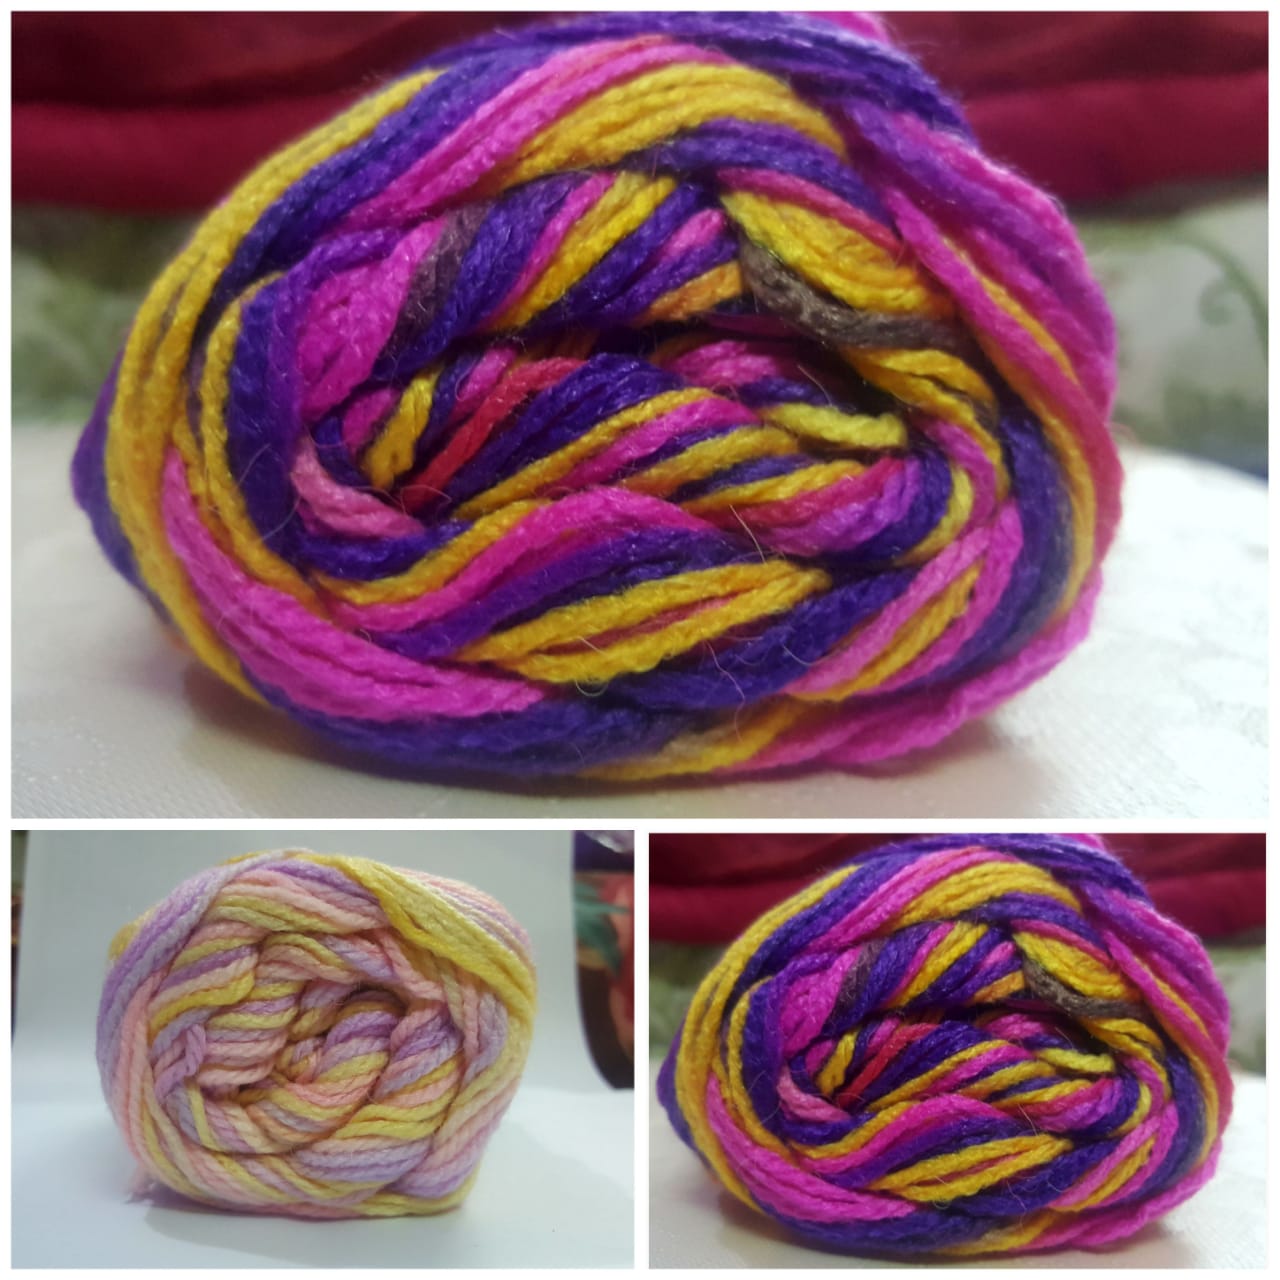 1 Pcs Multicolor Wool, High Quality, Each, Ball. Sweater, Yarn In Various Colors Blue Purpel Yellow Shades